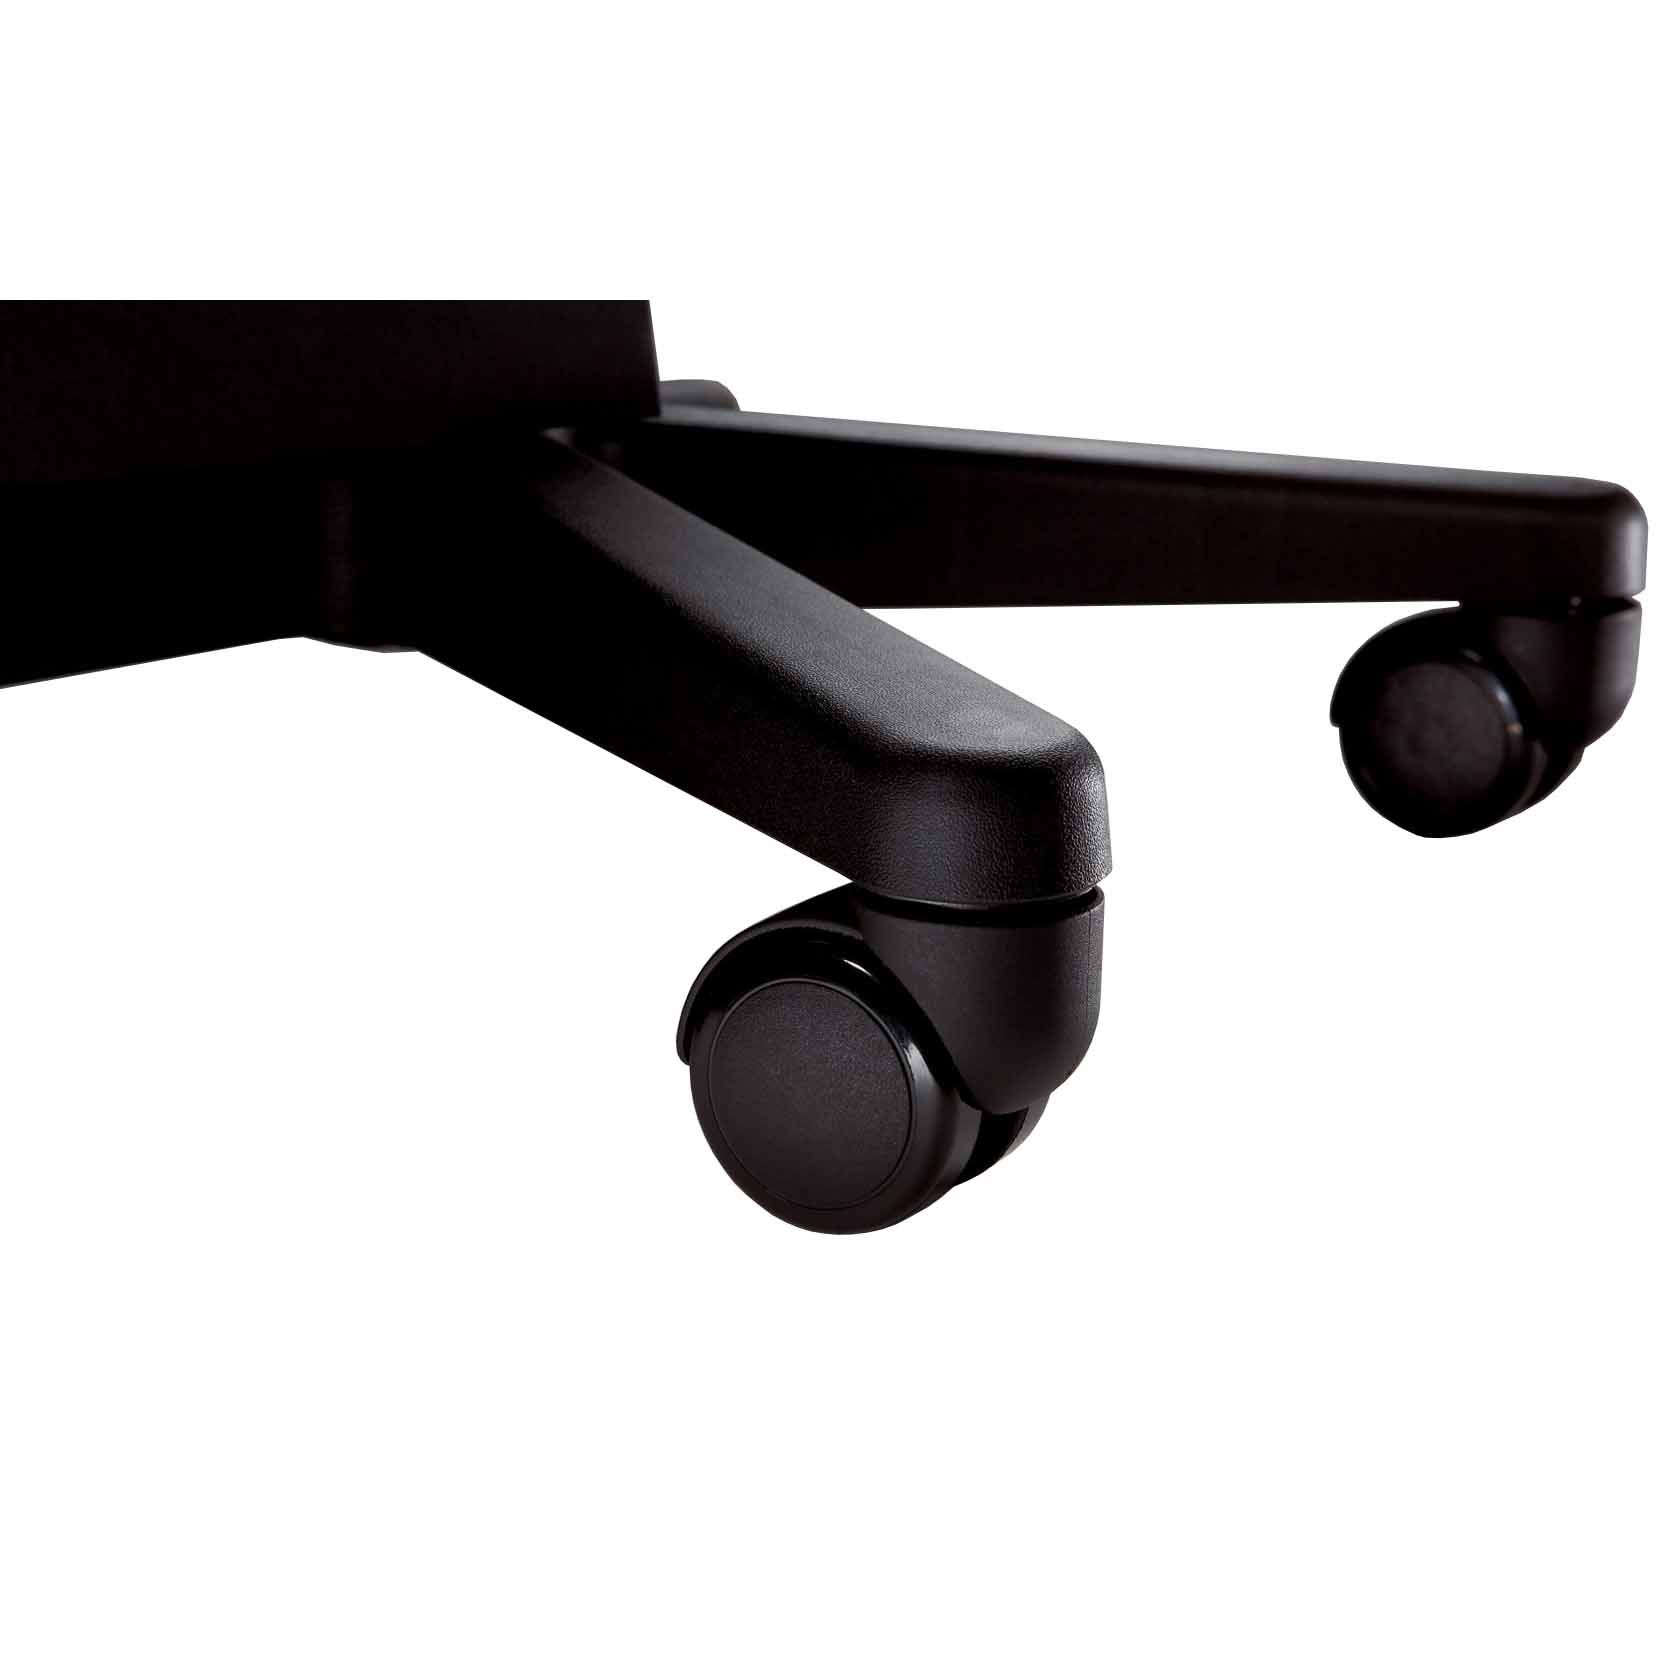 Ritter 270 Adjustable Stool - Soft Rubber Casters